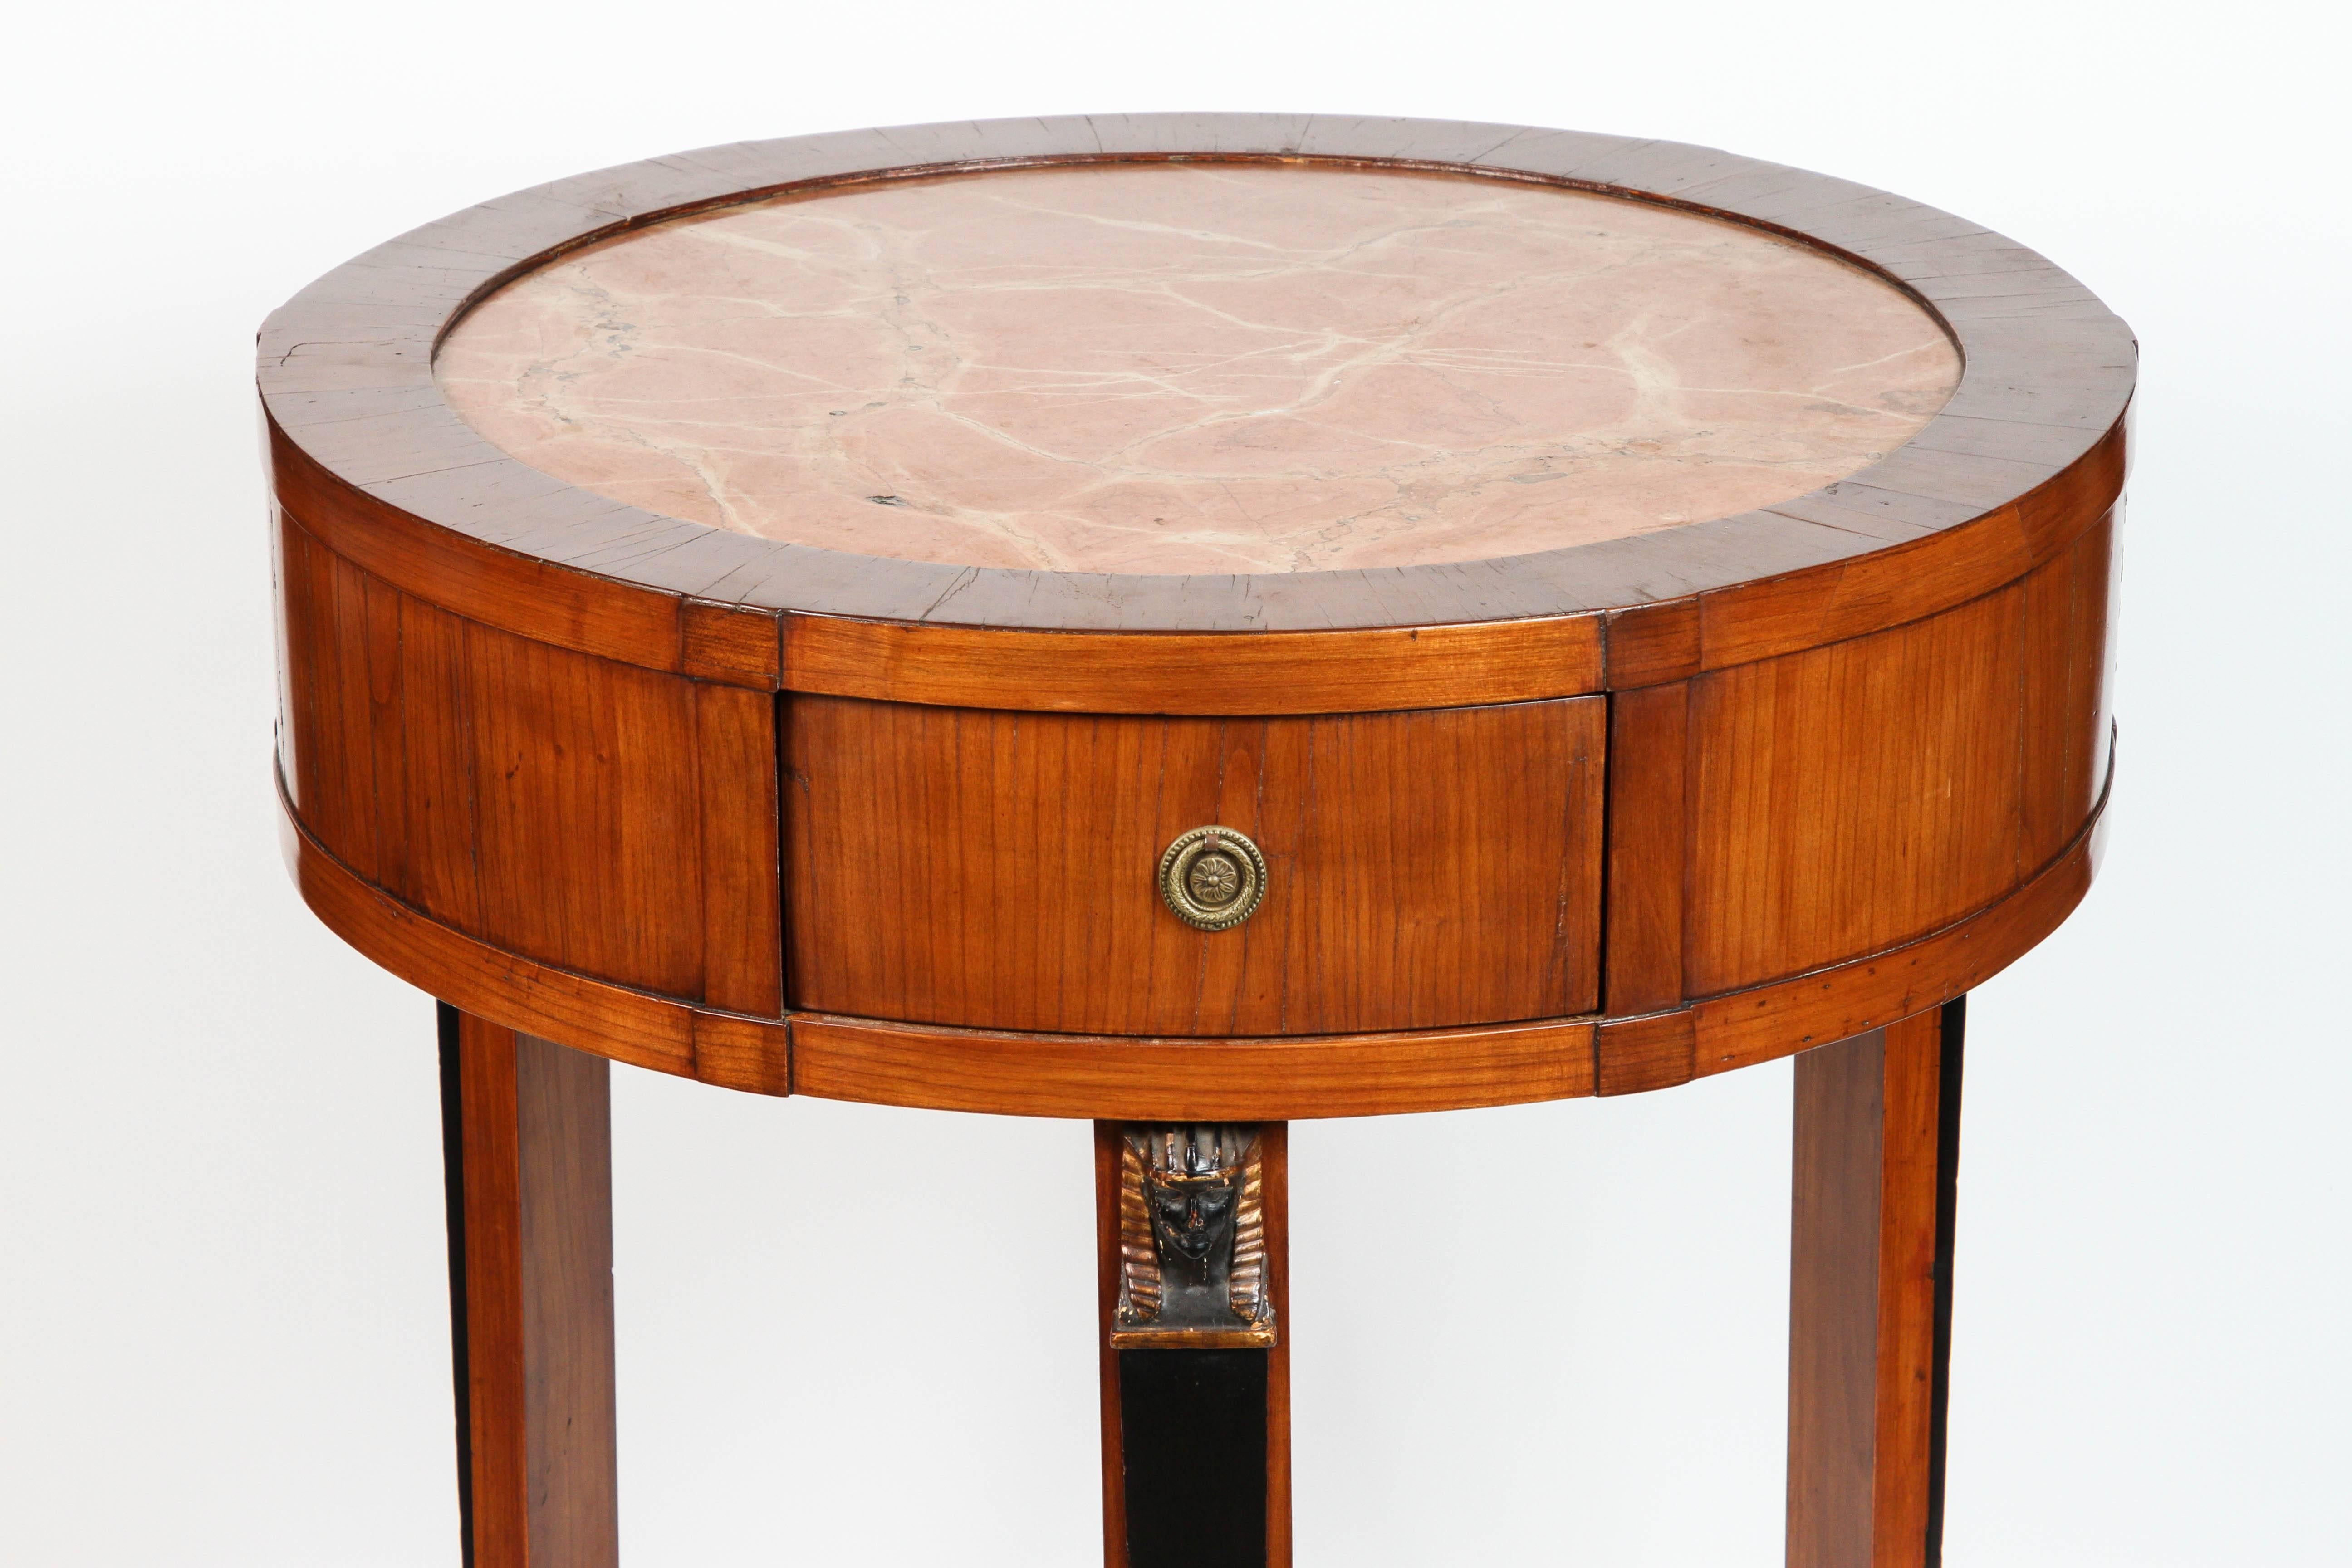 A beautiful Italian walnut neoclassical round table with inset marble top, drawer, and brass hardware. The table is raised by paws joined by a triangular stretcher with concave sides. Each leg has a carved pharaoh-figure.